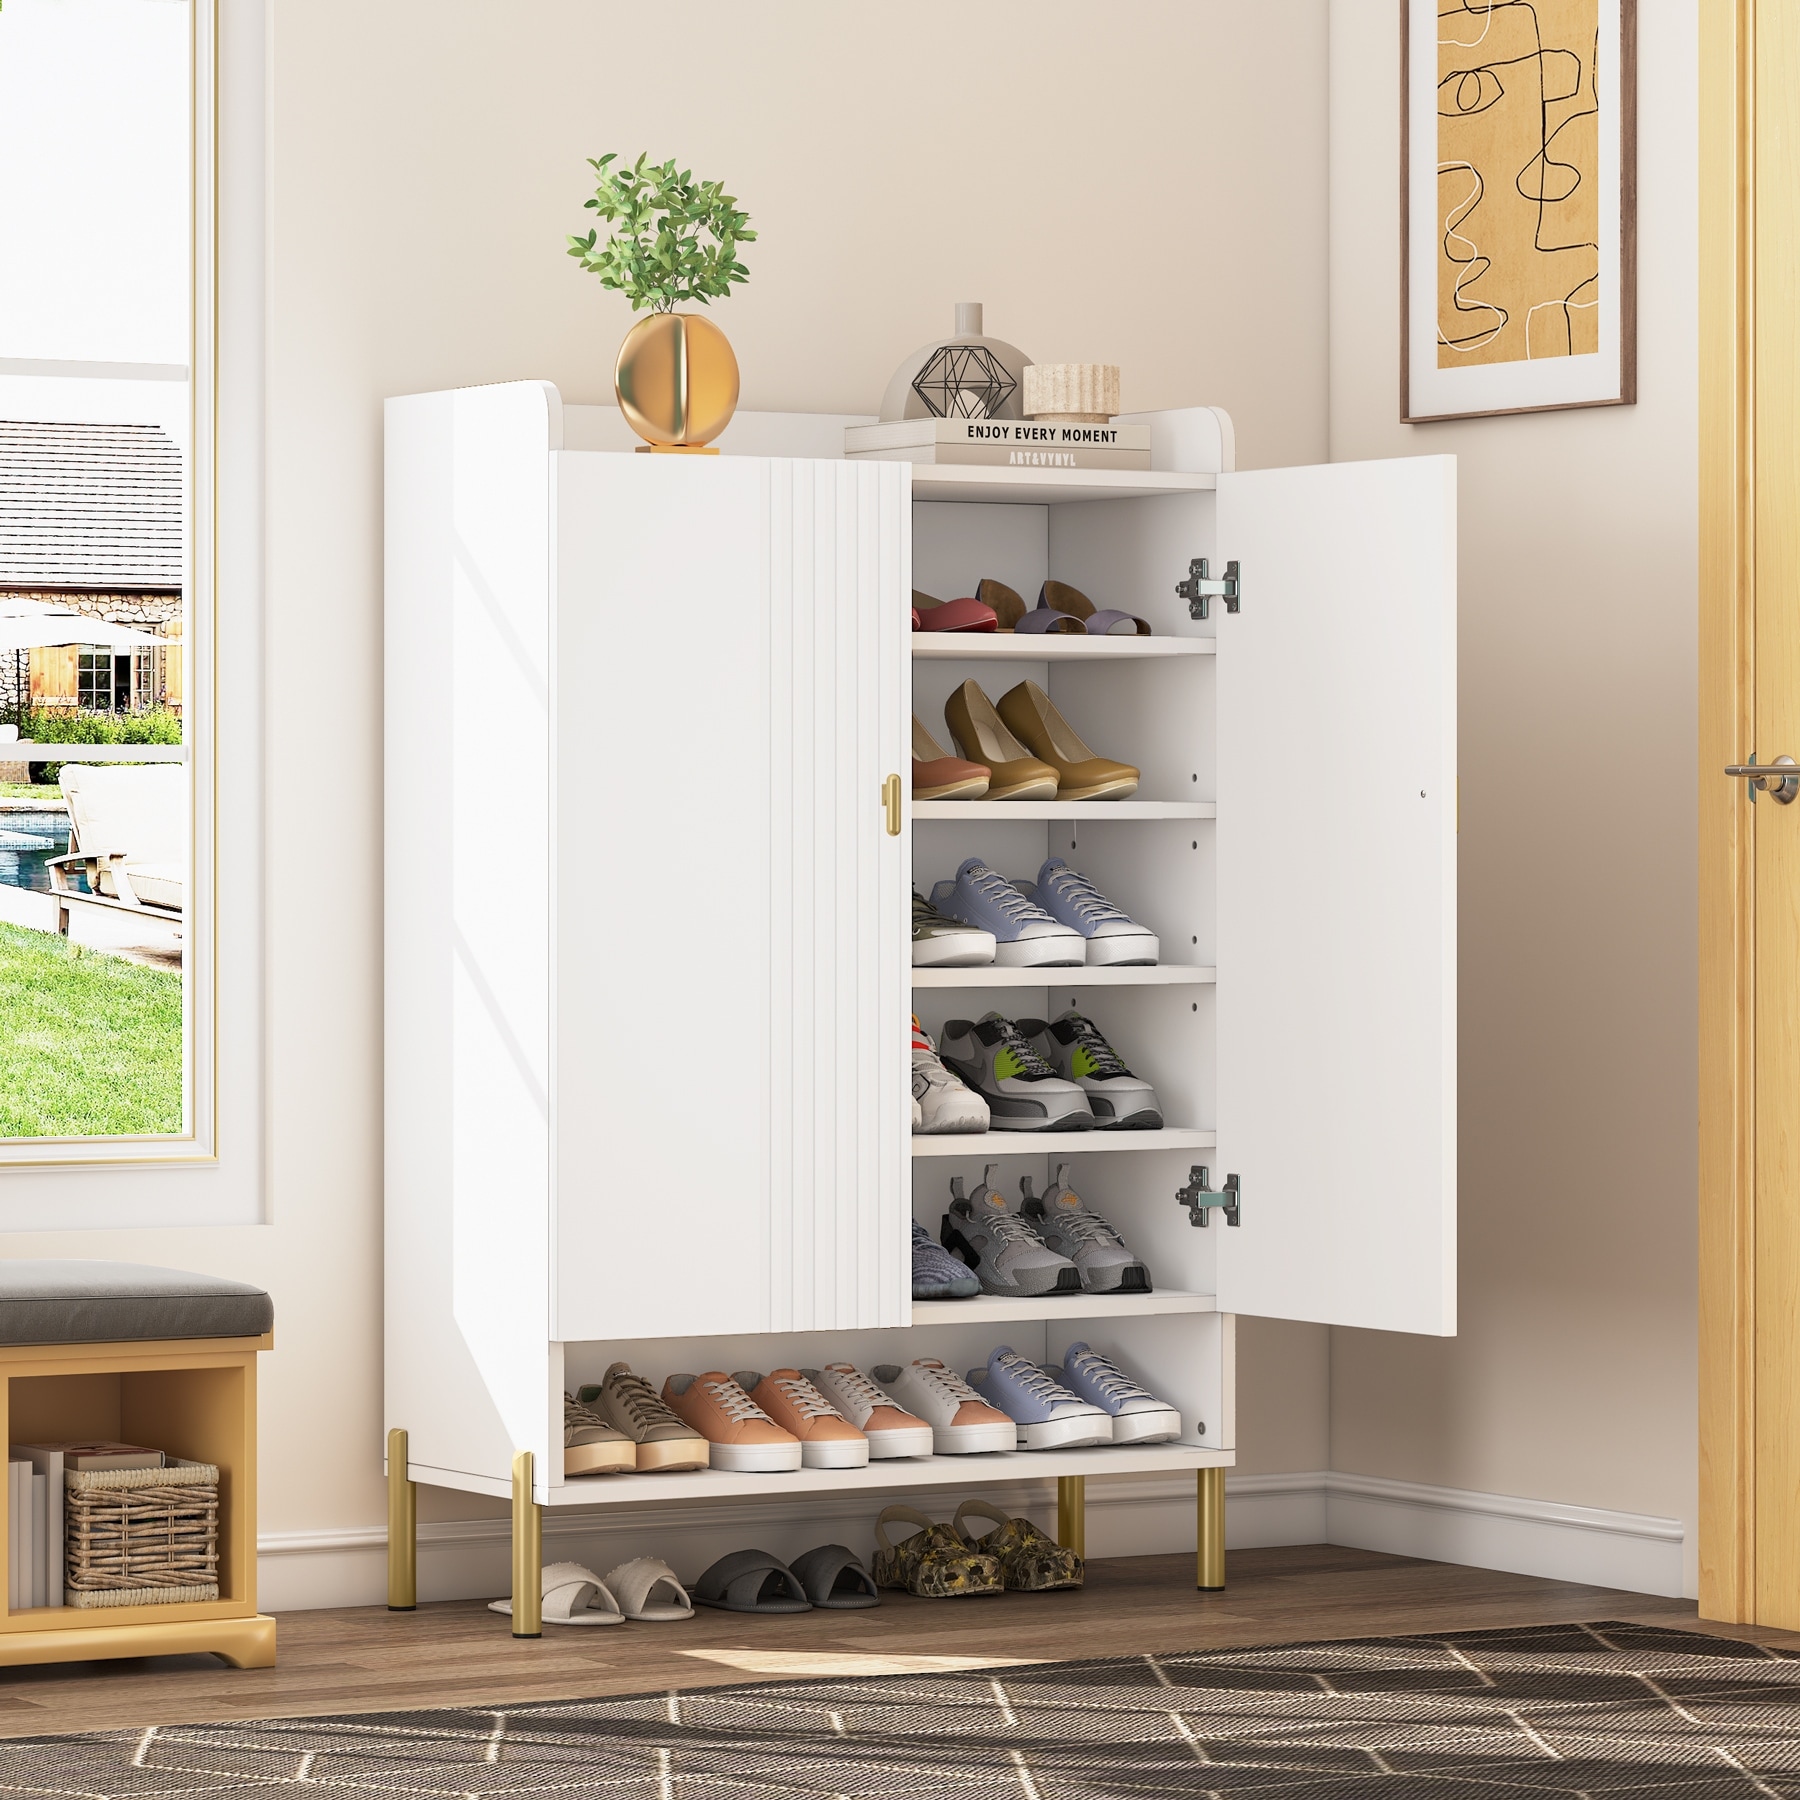 https://ak1.ostkcdn.com/images/products/is/images/direct/8086c1f83306ed25b8dd733990b69f35aa5d3ae9/Slim-6-Tier-Shoe-Cabinet-Storage-for-Entryway.jpg